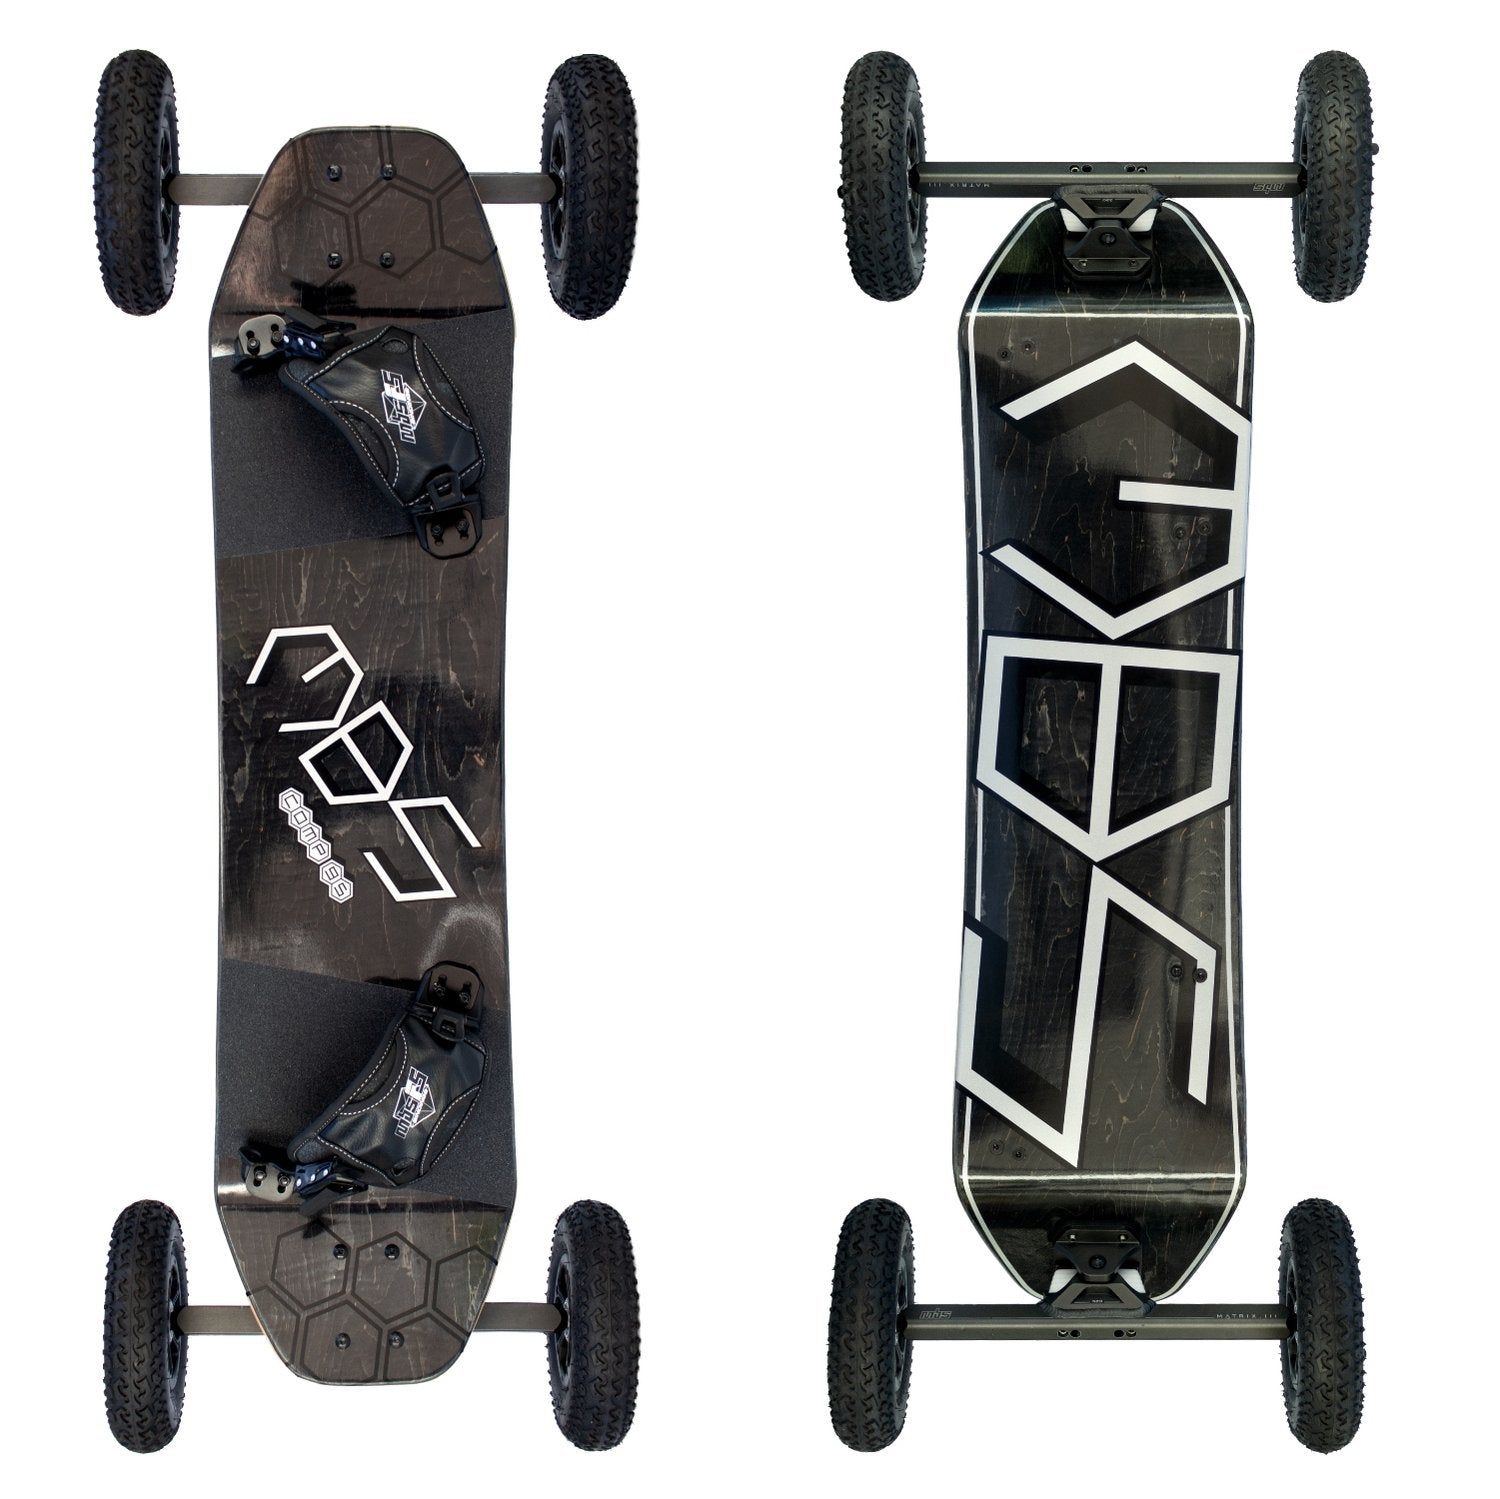 Mountainboards – New Rock Surf